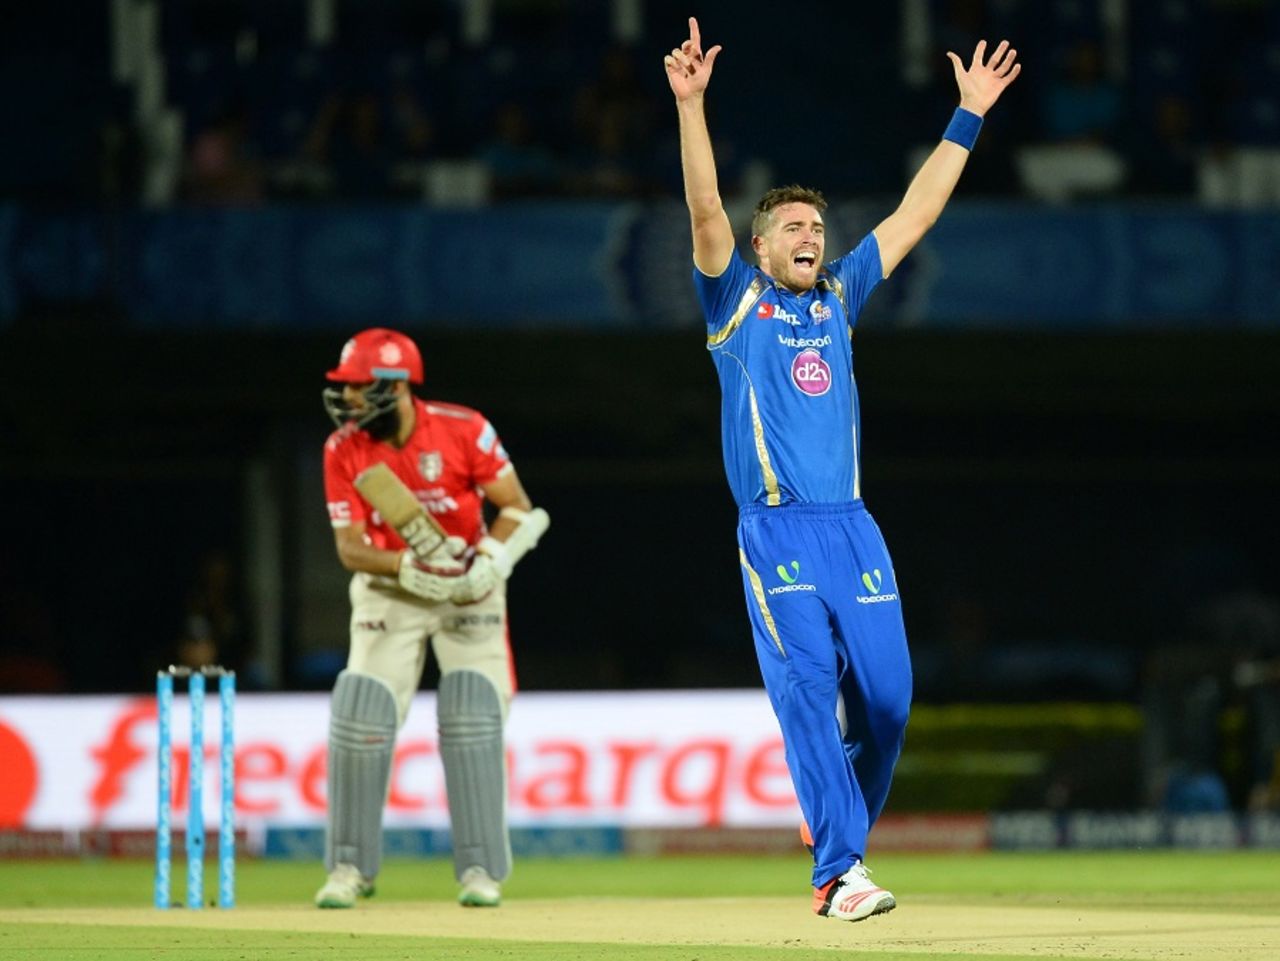 Tim Southee successfully appeals for the wicket of Hashim Amla after trapping him lbw, Mumbai Indians v Kings XI Punjab, IPL 2016, Visakhapatnam, May 13, 2016